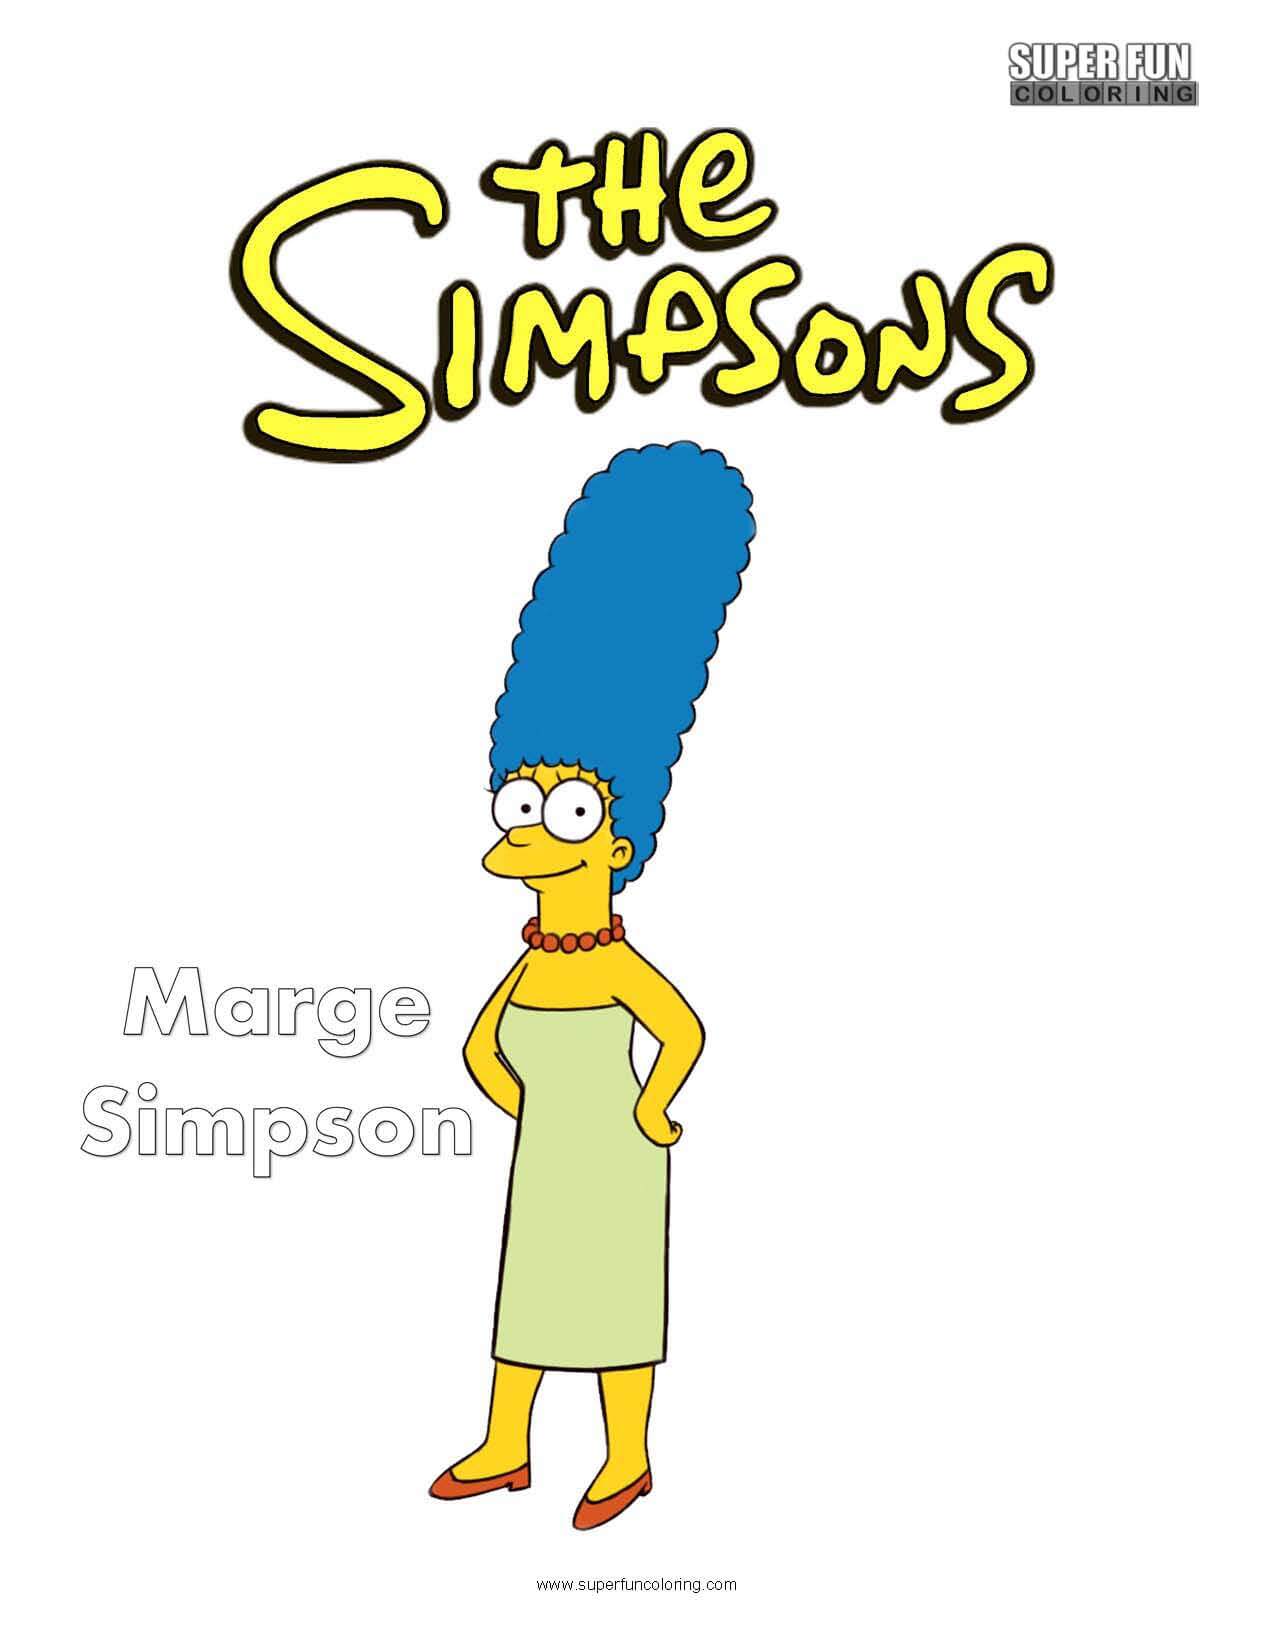 Marge Simpson- The Simpsons Coloring Page